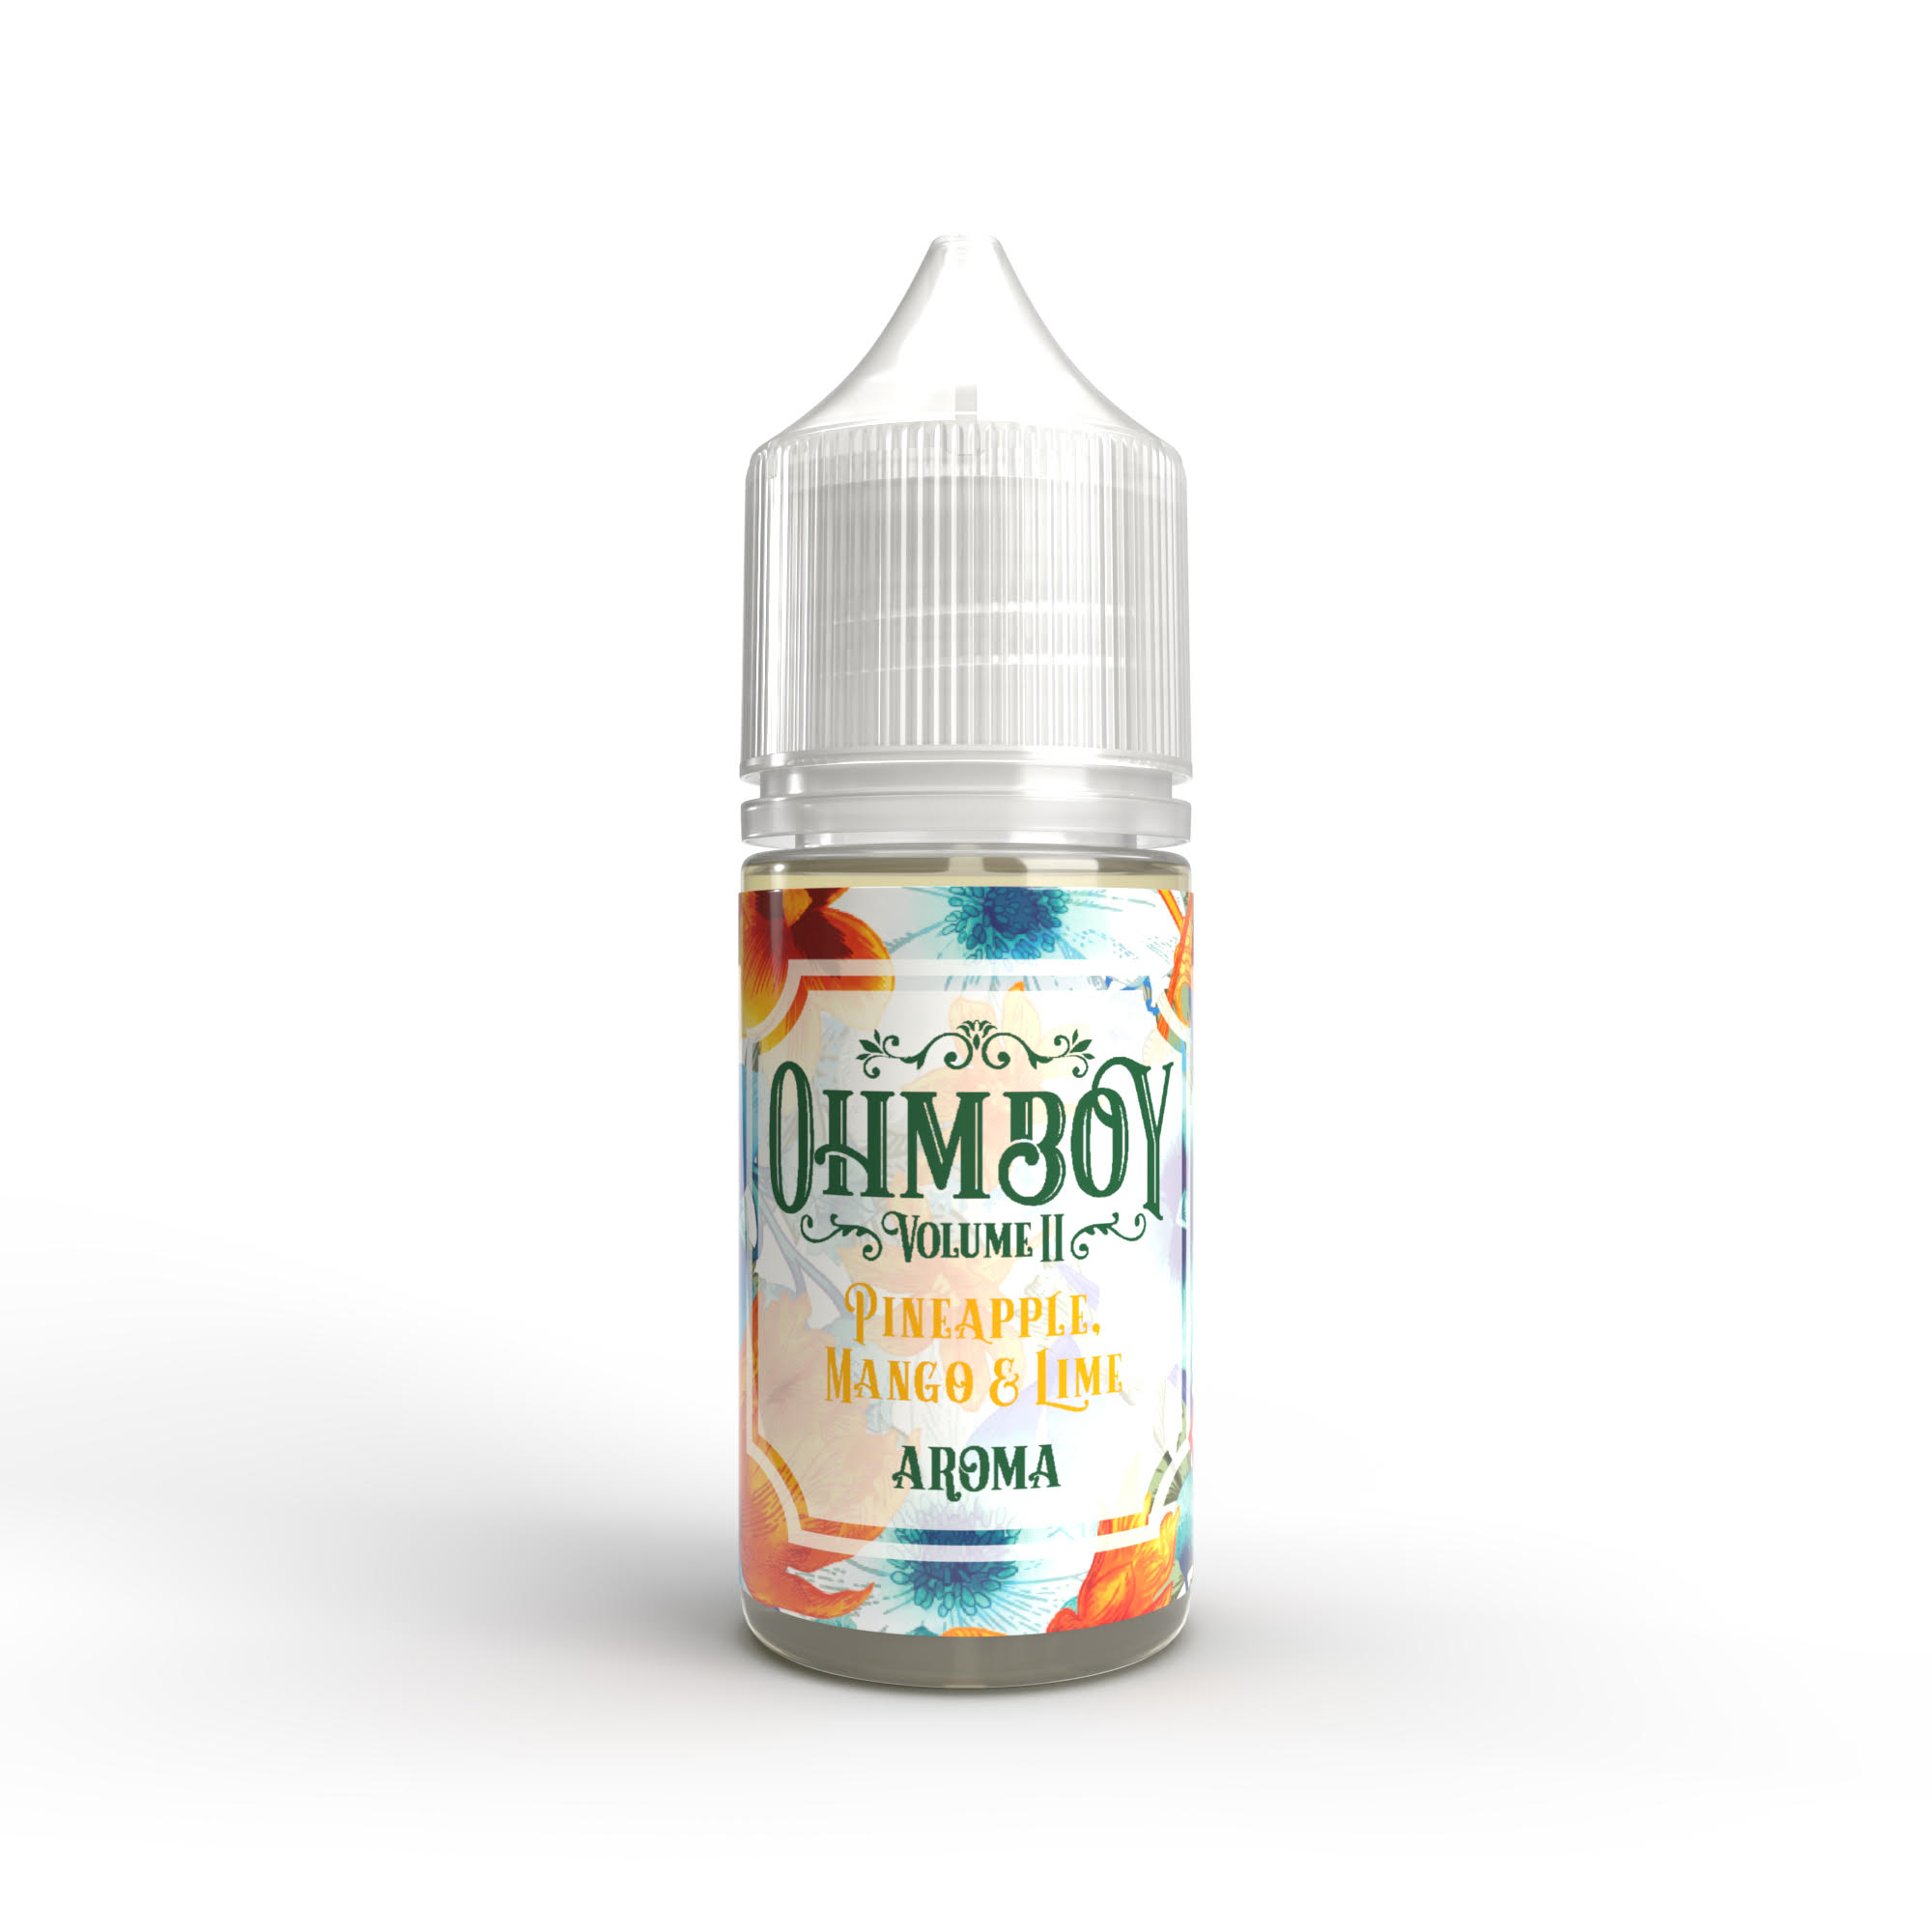 Pineapple, Mango & Lime Passion Fruit Flavour Concentrate by Ohm Boy